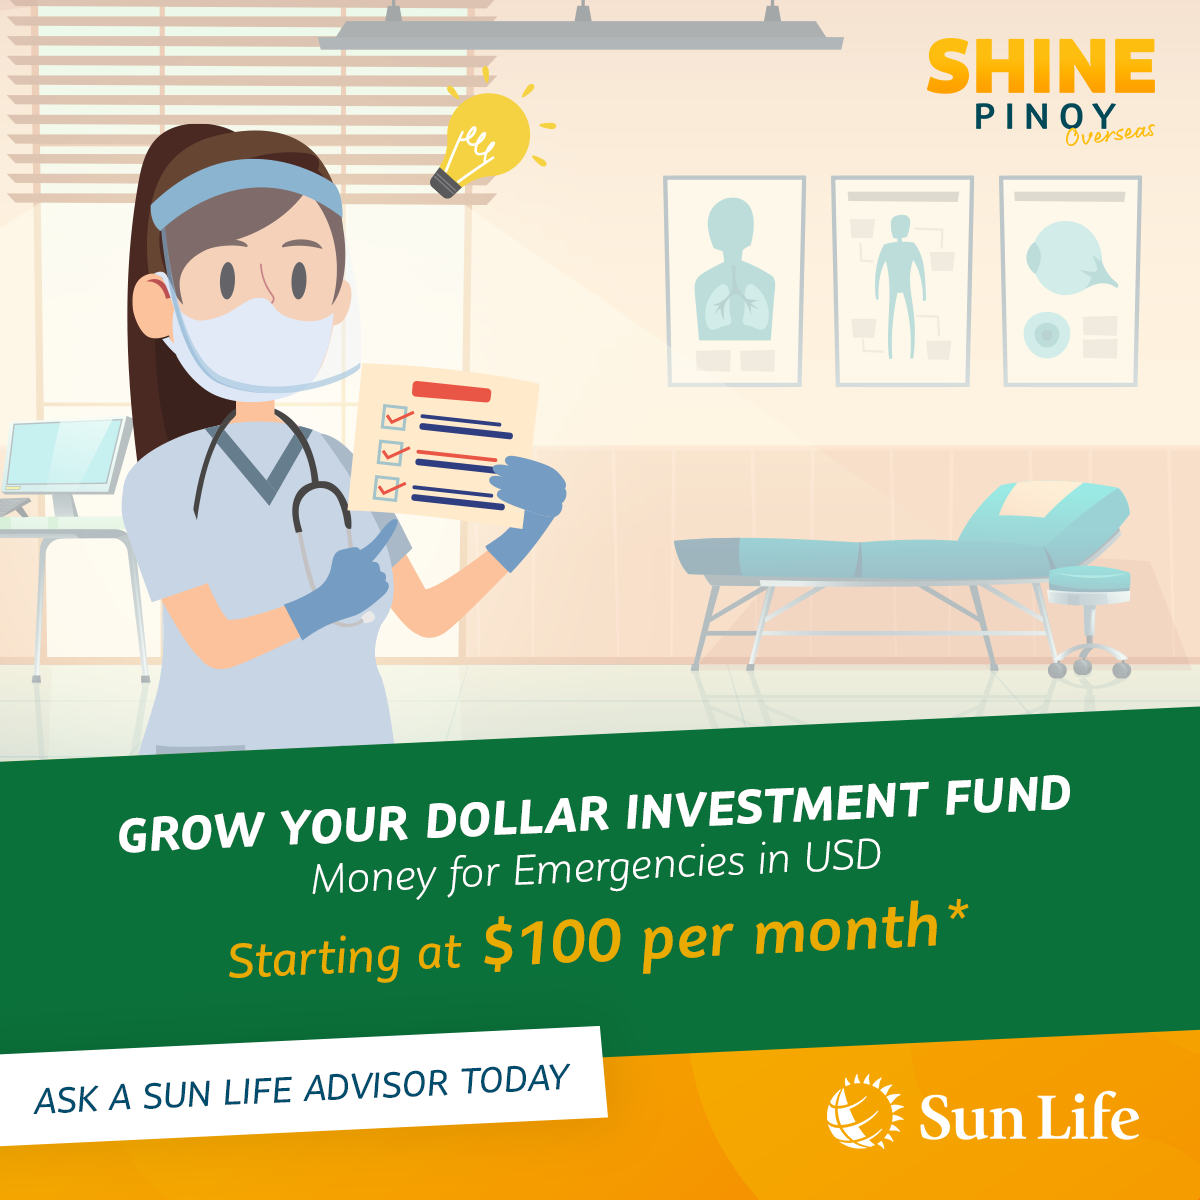 OFW Grow your Dollar Investment Fund | Shine Pinoy Insurance for OFW